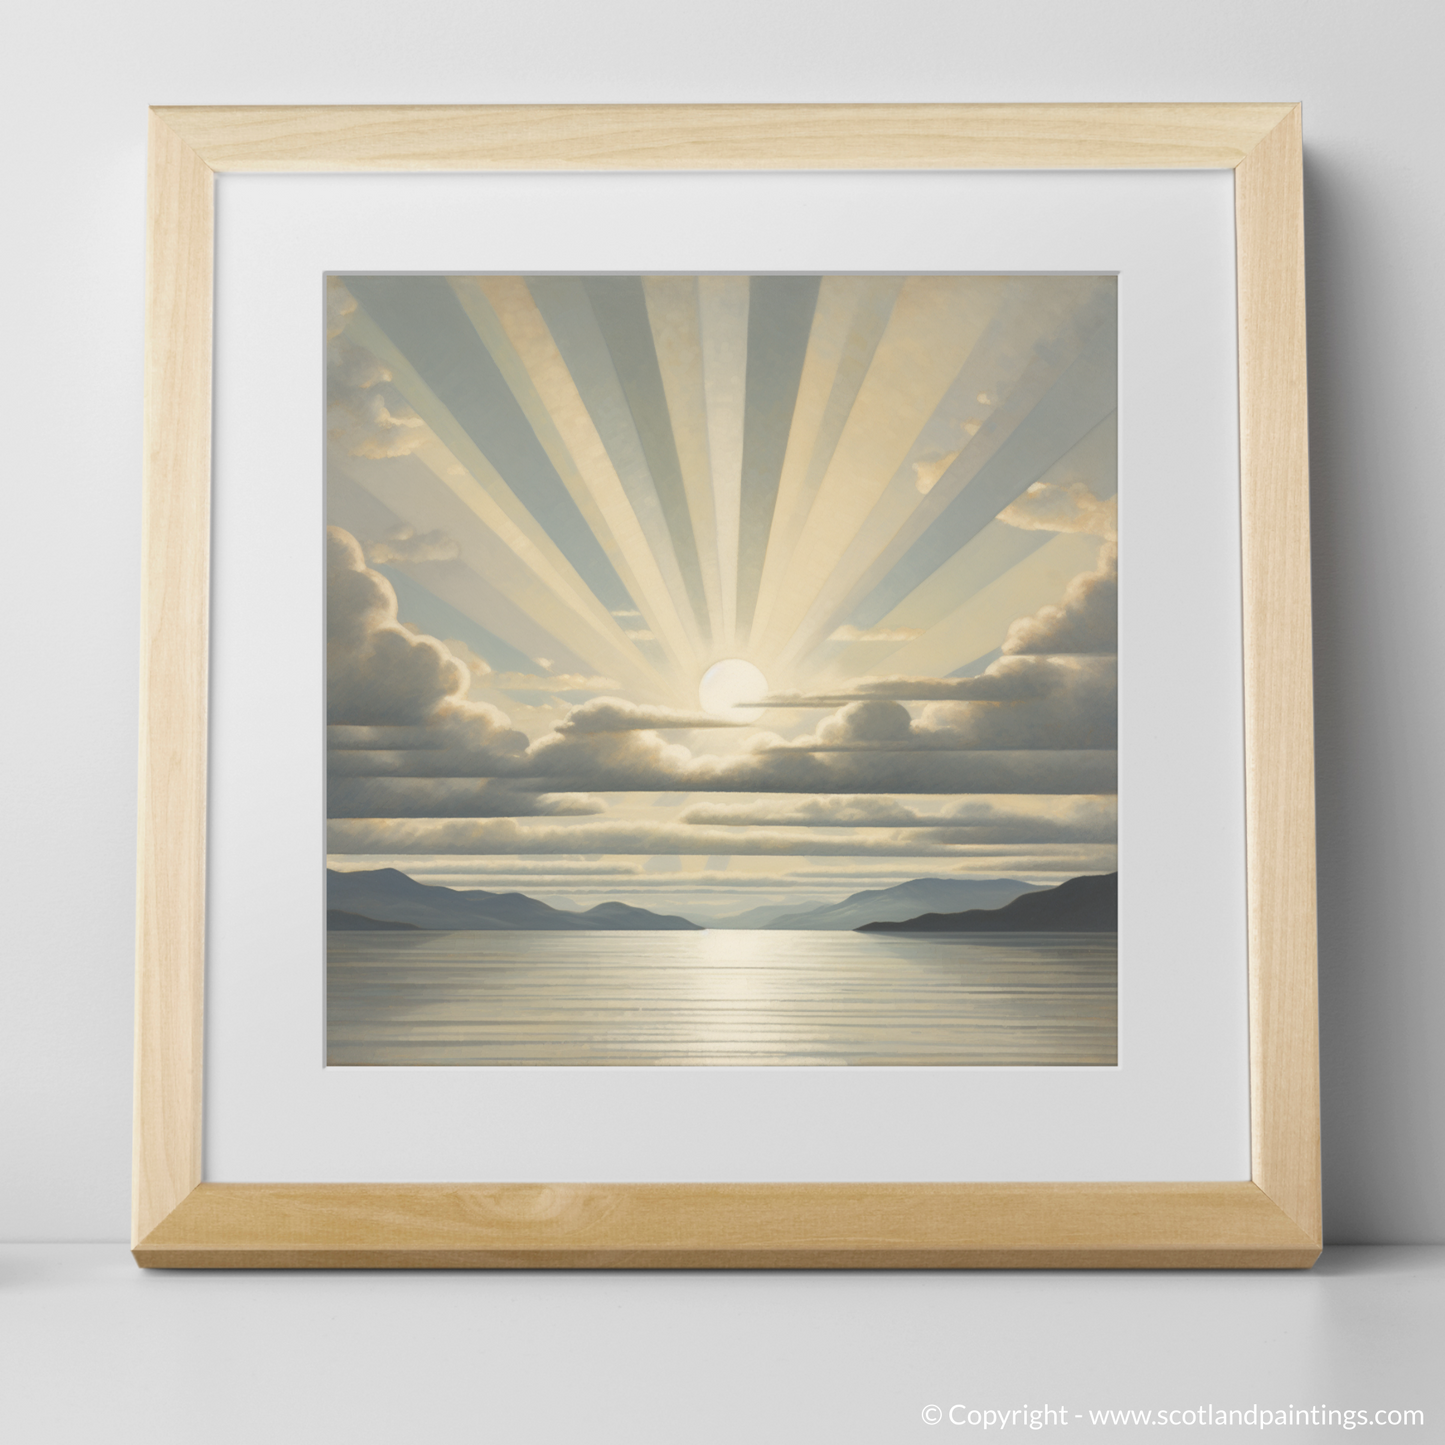 Art Print of Sun rays through clouds above Loch Lomond with a natural frame